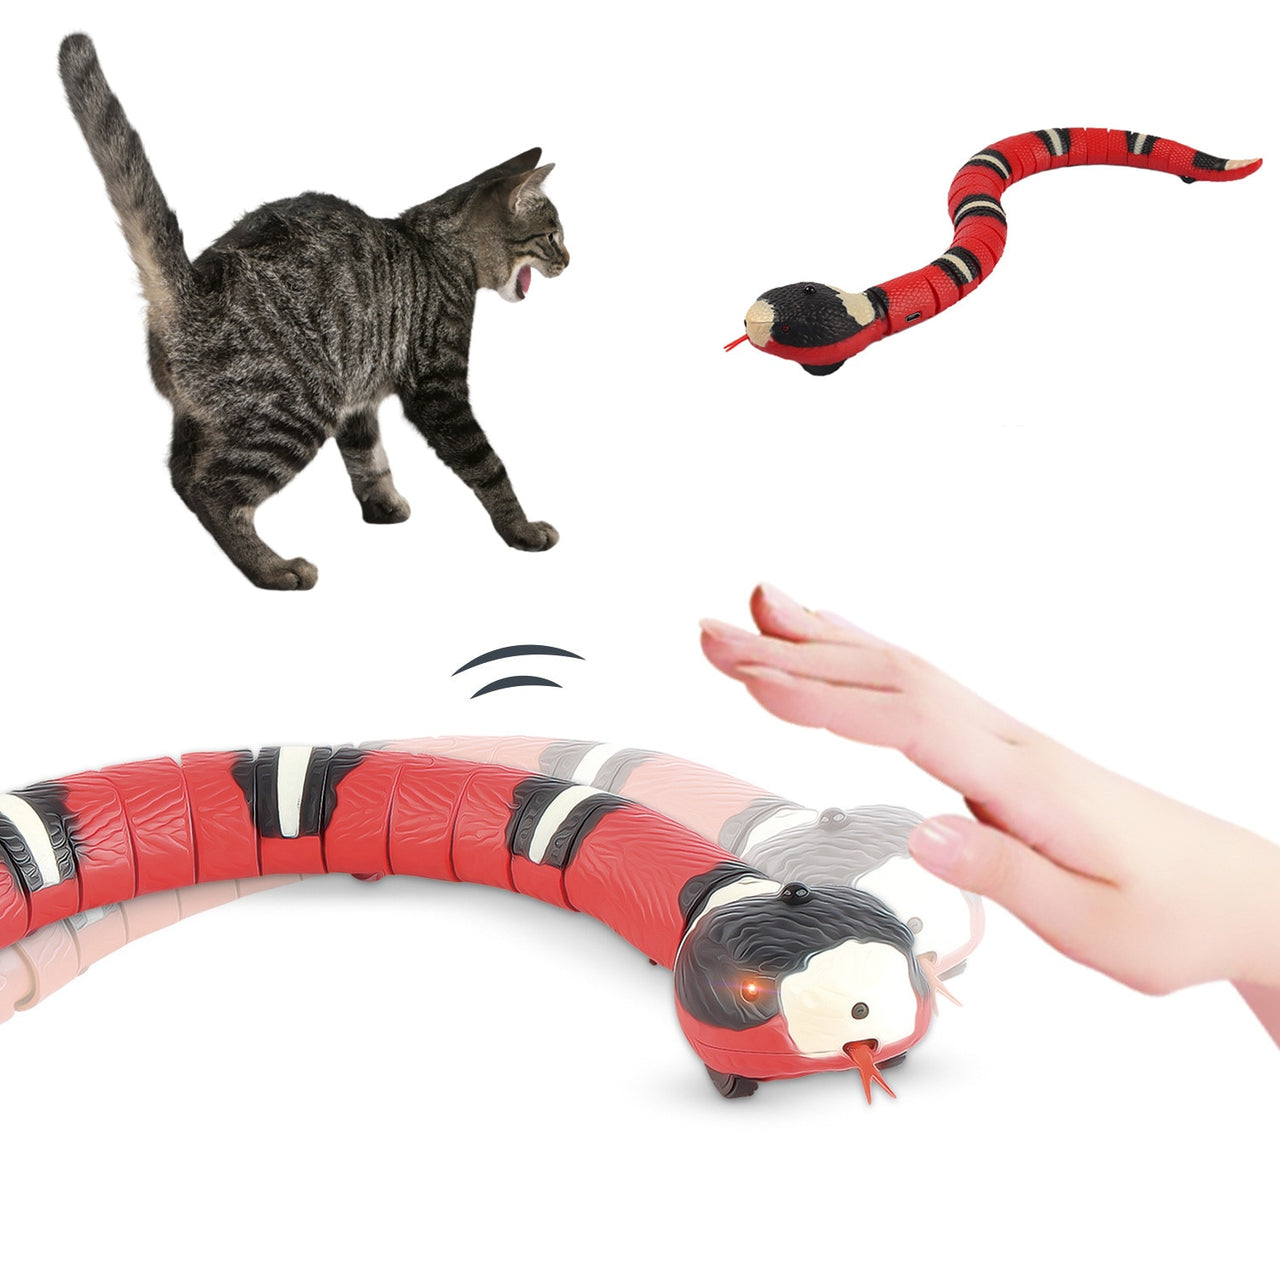 The Snake Toy